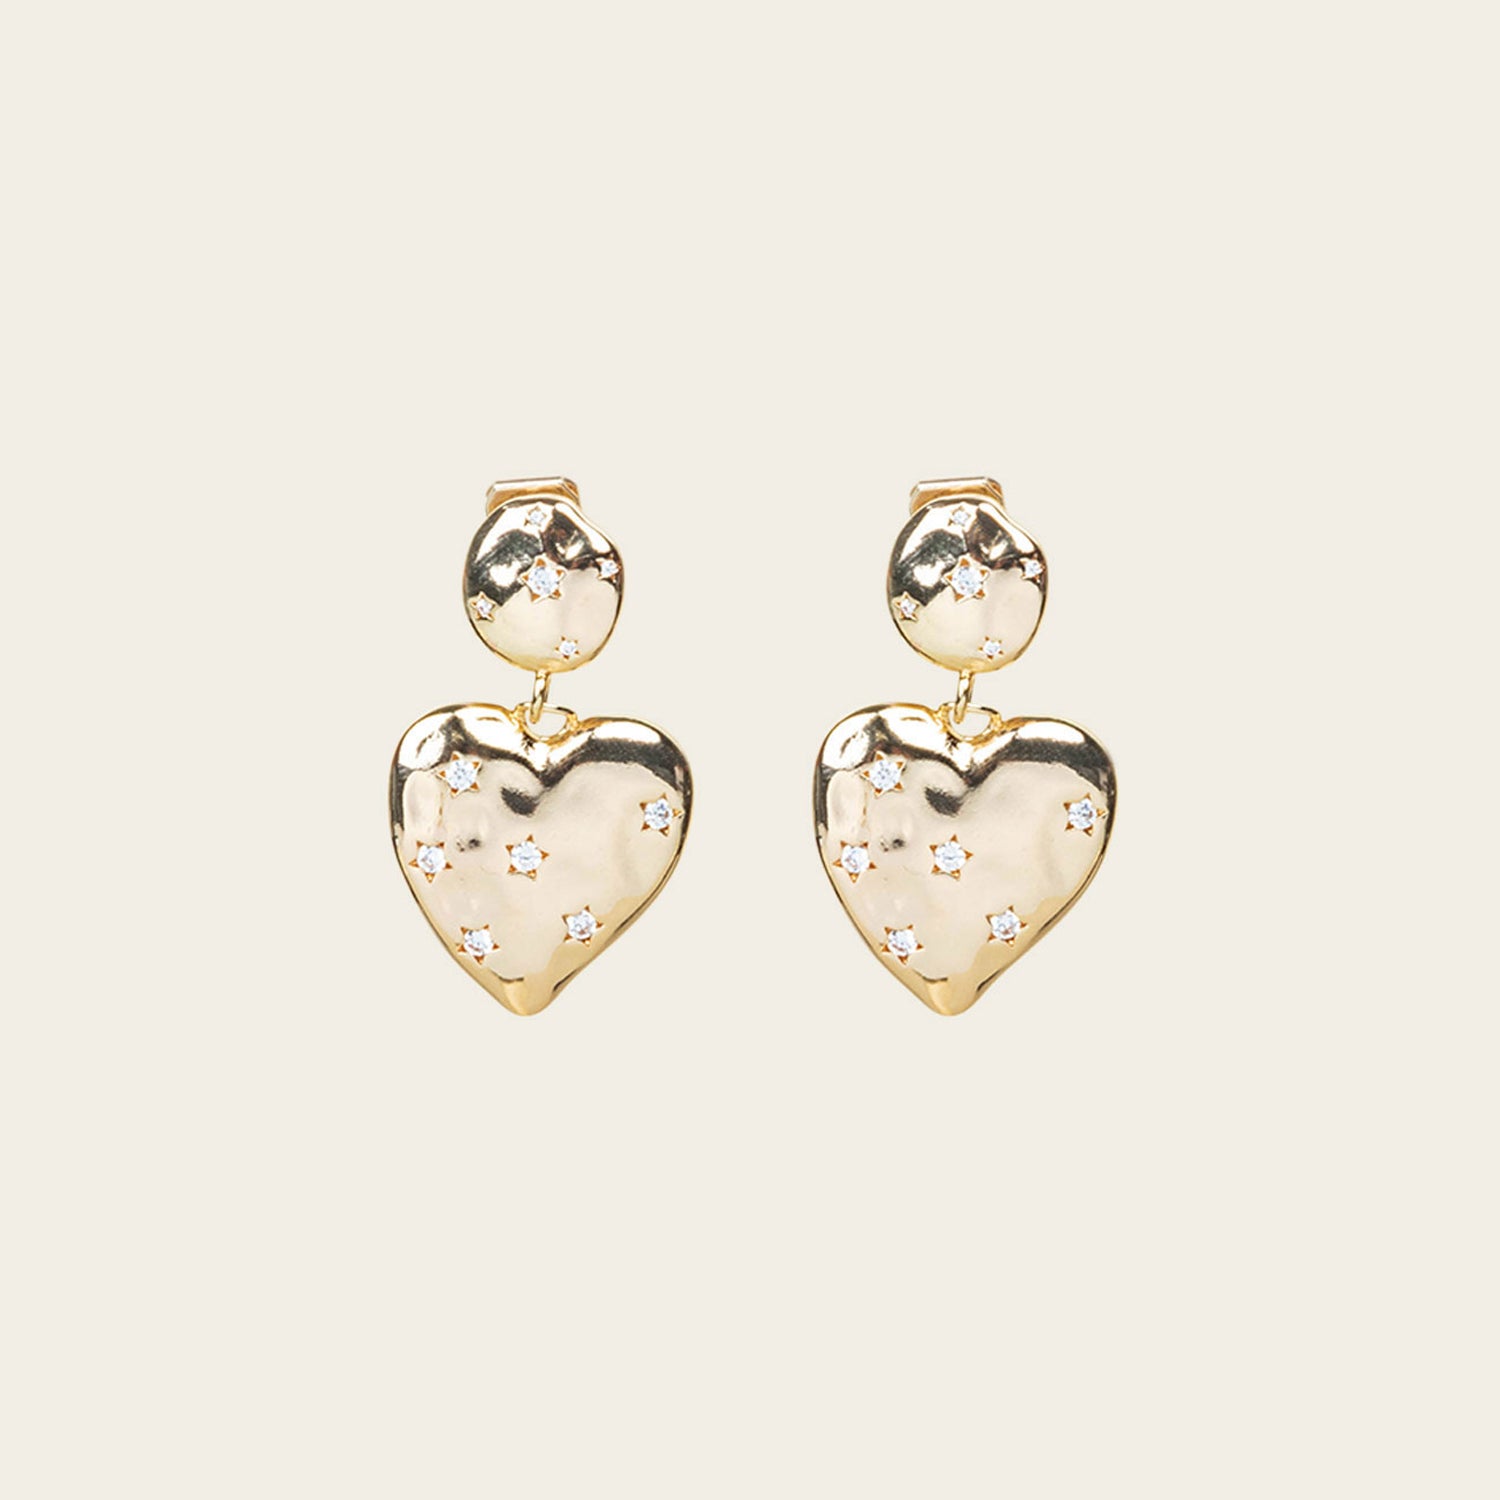 Image of the Amore Clip On Earrings in Gold offer a secure, padded closure type for a comfortable wear of 8-12 hours that is suitable for all ear types. This single pair features stainless steel and cubic zirconia construction and is non-tarnish and water resistant. Note: The clip-on earring has removable rubber padding.